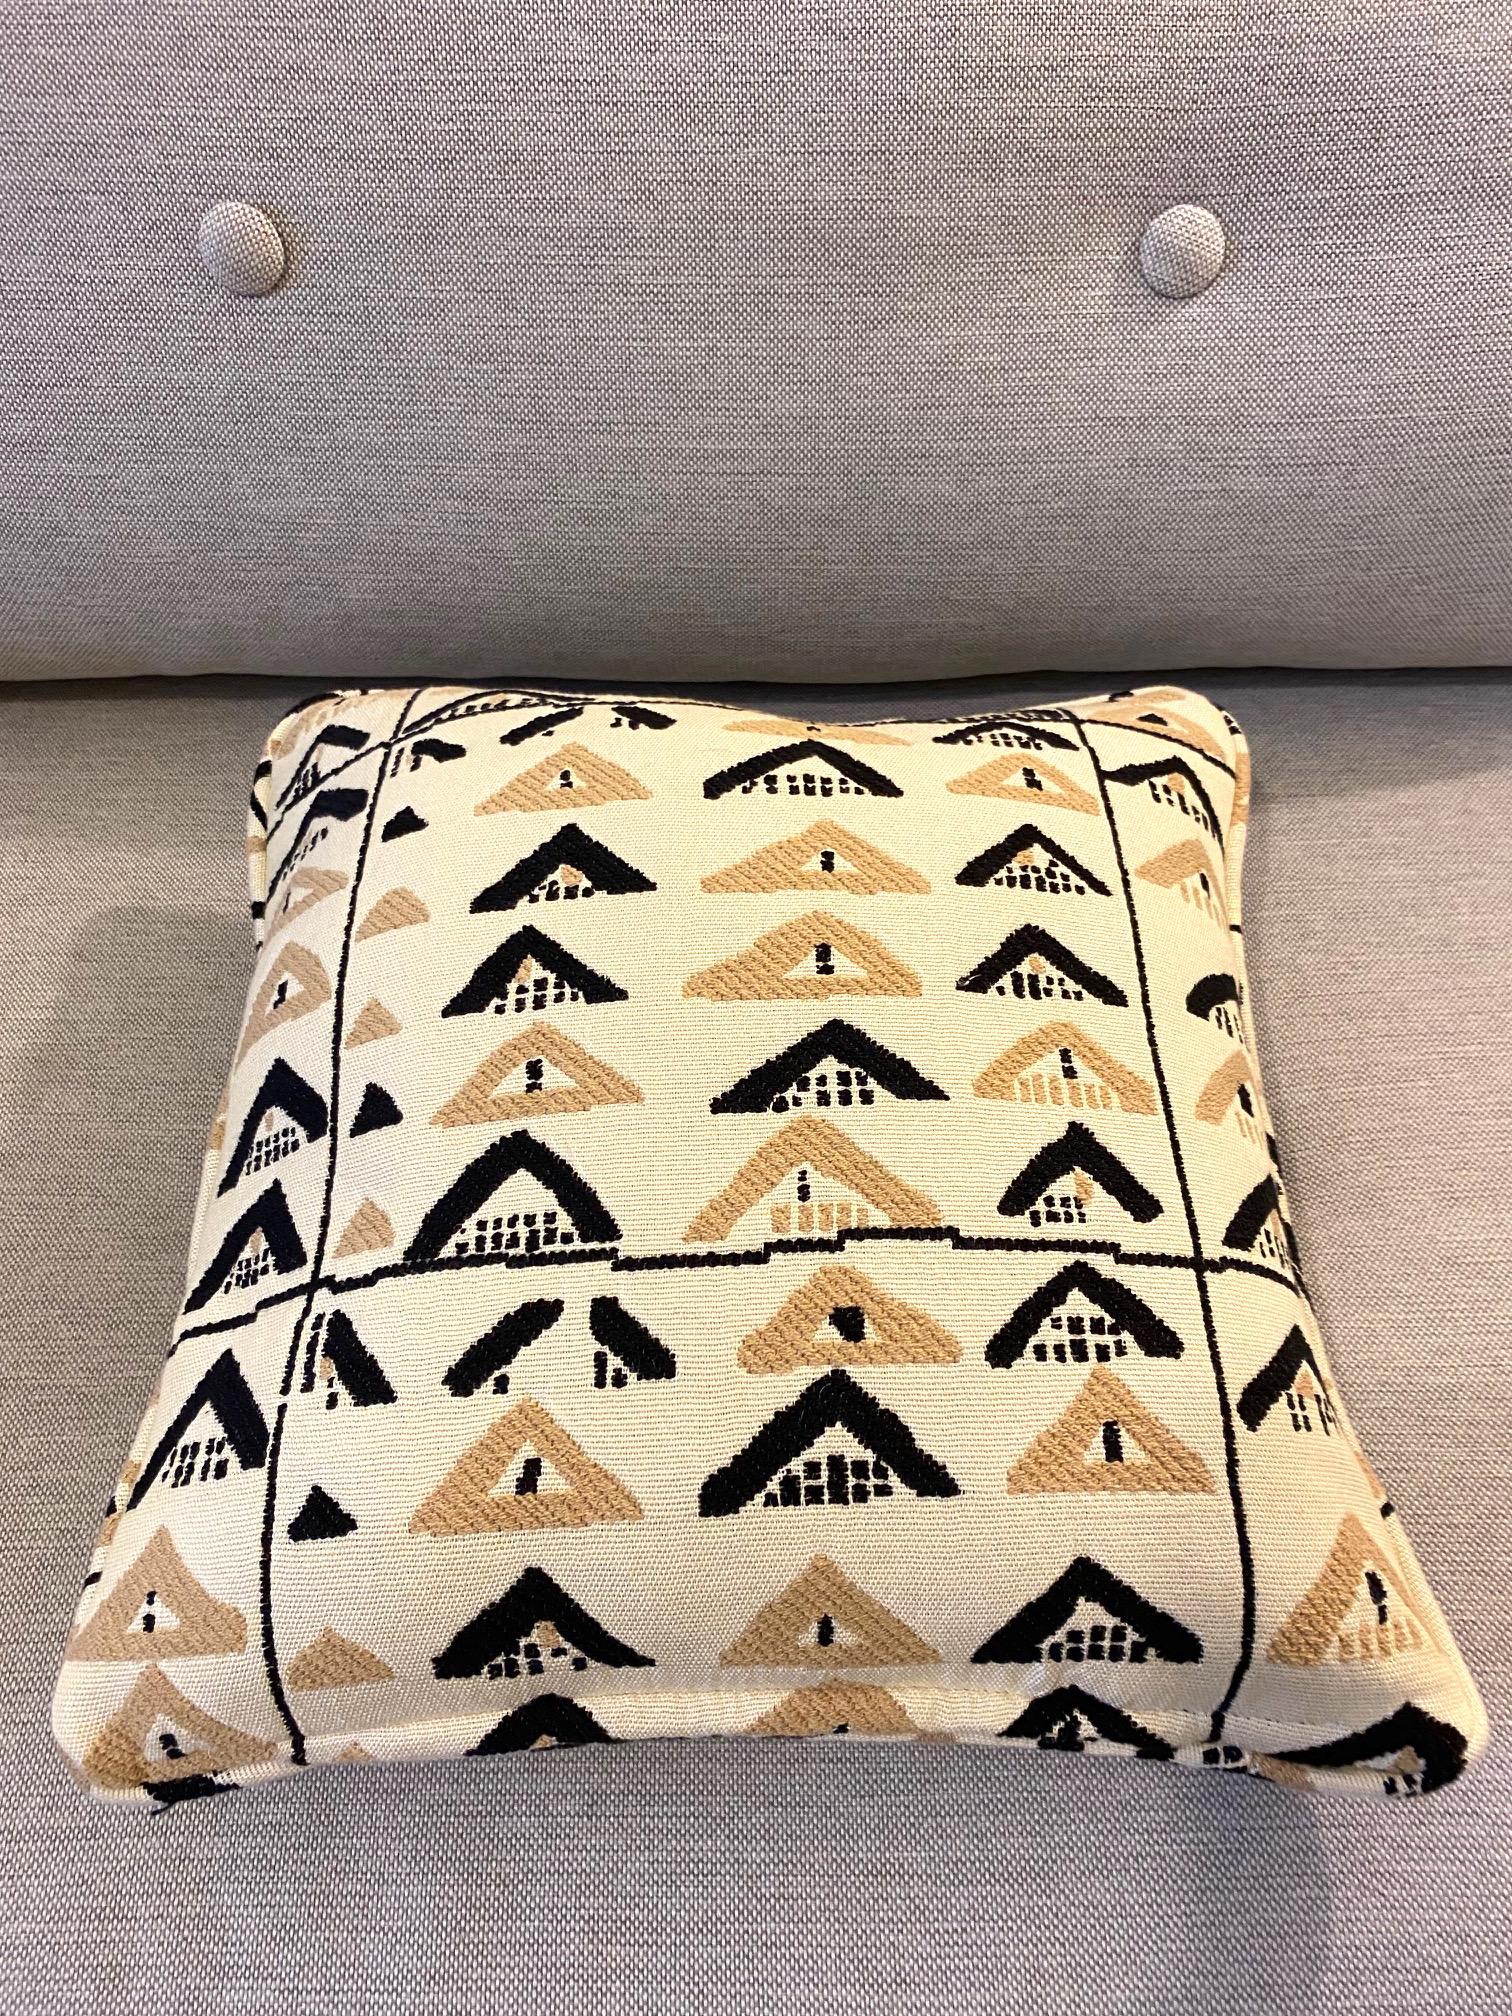 Tribal Pierre Frey Throw Pillow with Vintage African Kuba Print in Beige and Black